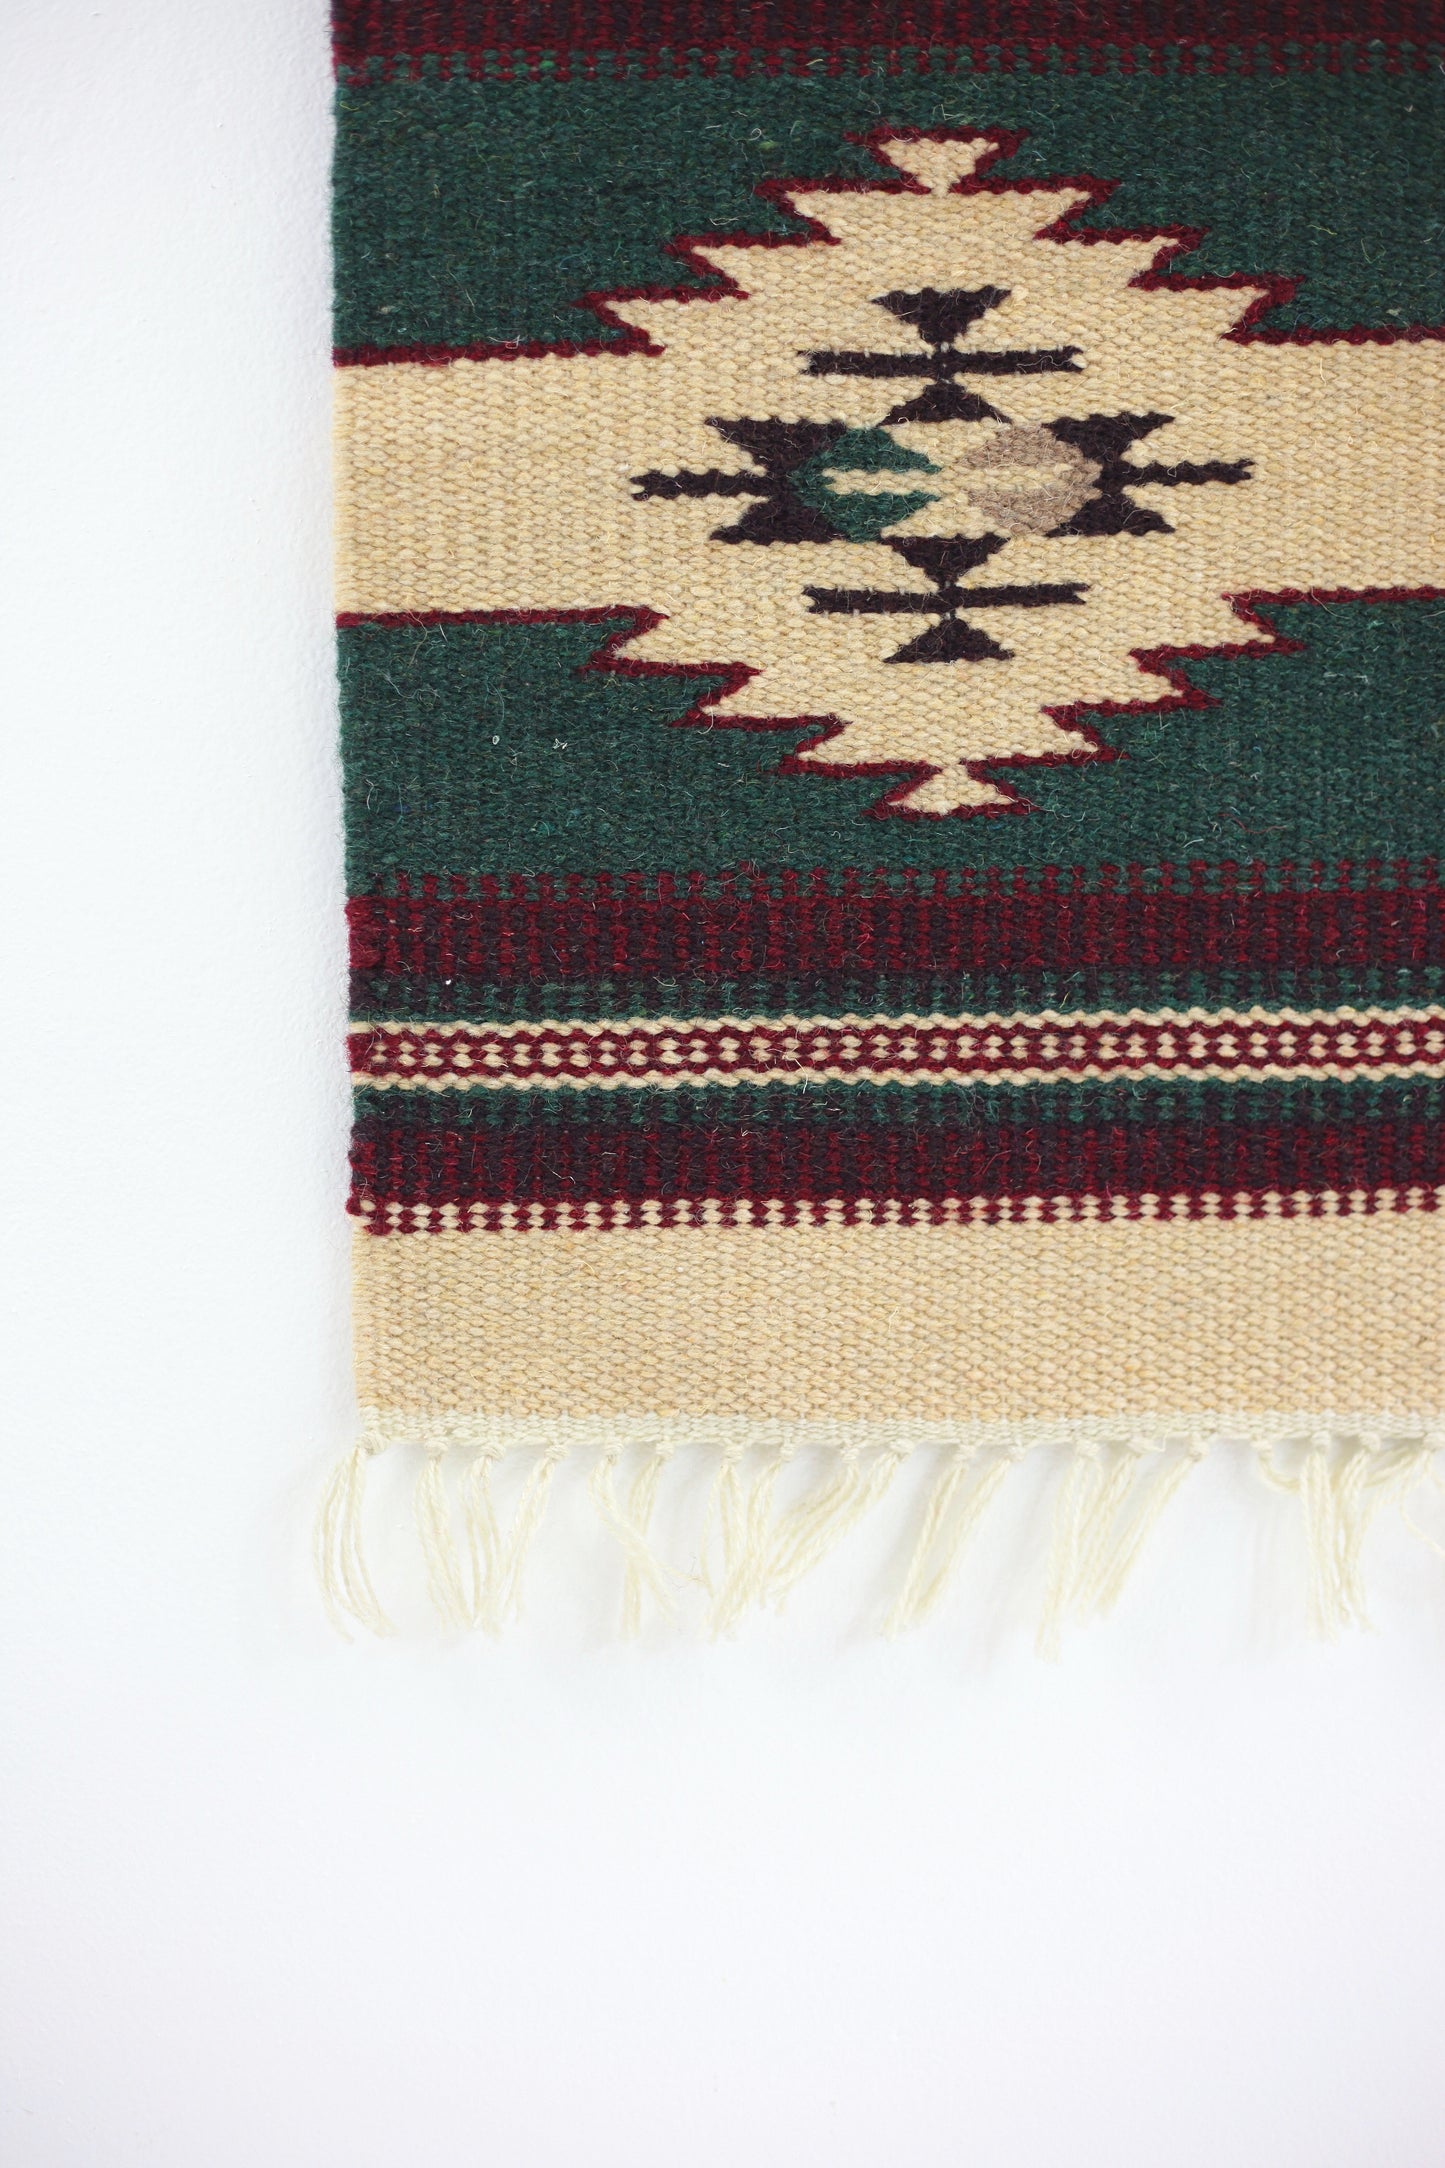 SOLD - Vintage Southwestern Handwoven Wool Mat / Wall Tapestry